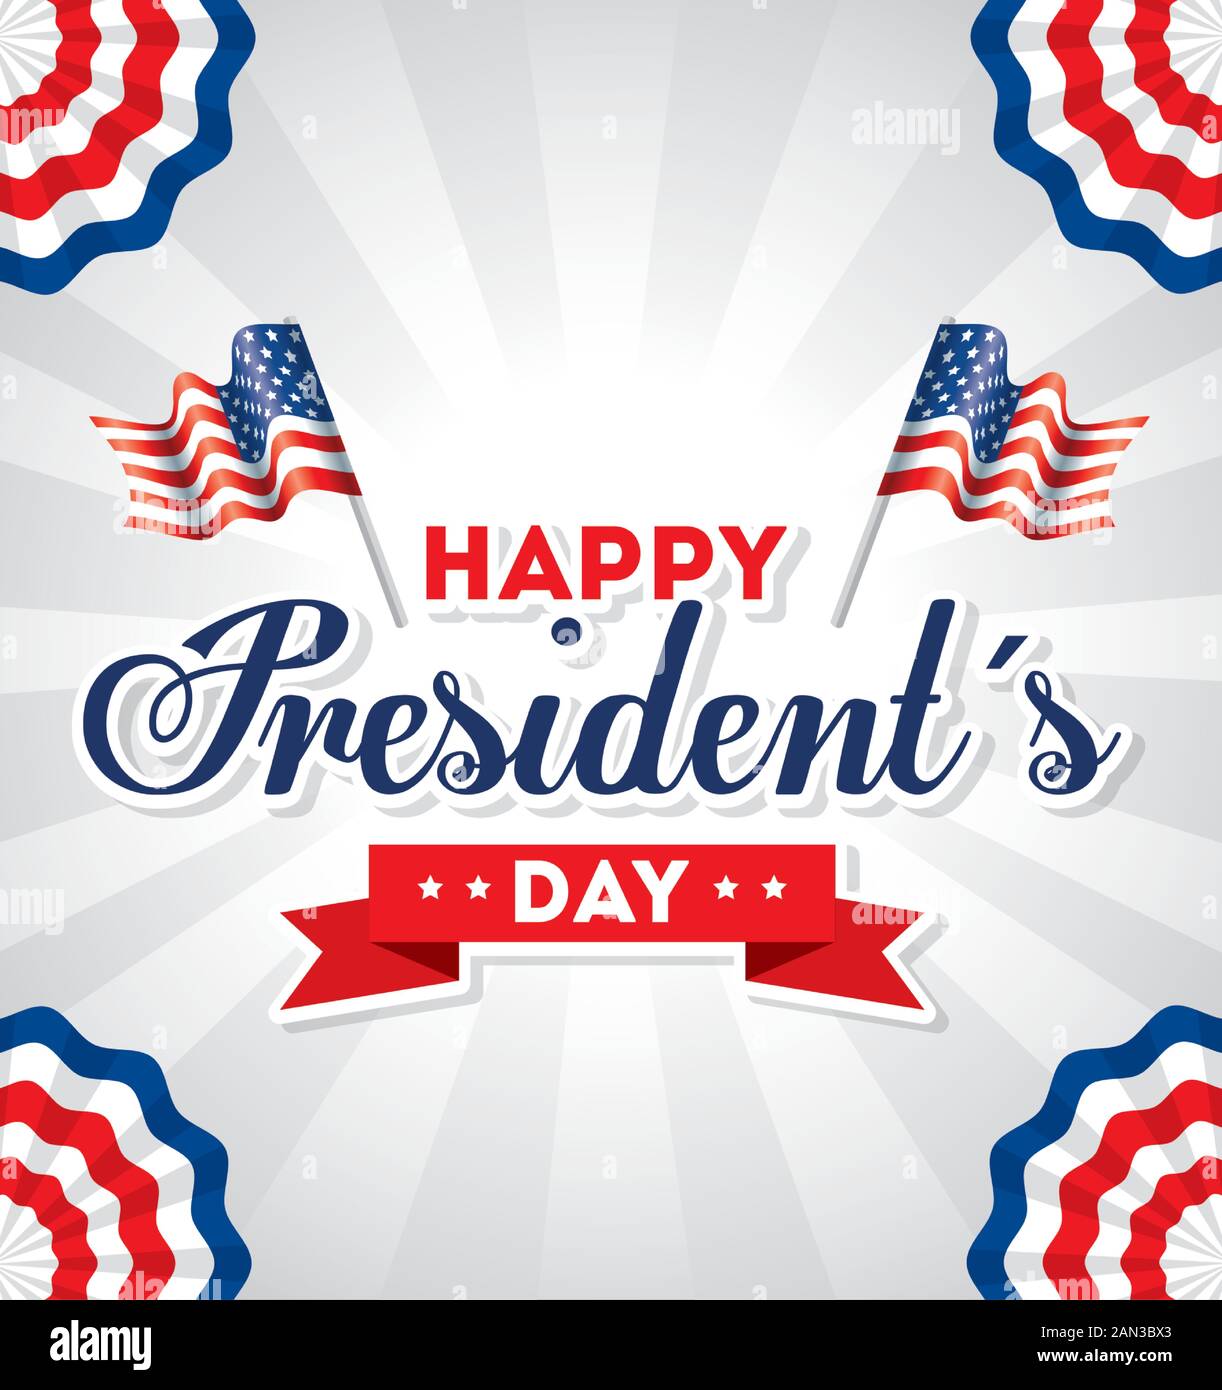 Flags of usa happy presidents day vector design Stock Vector